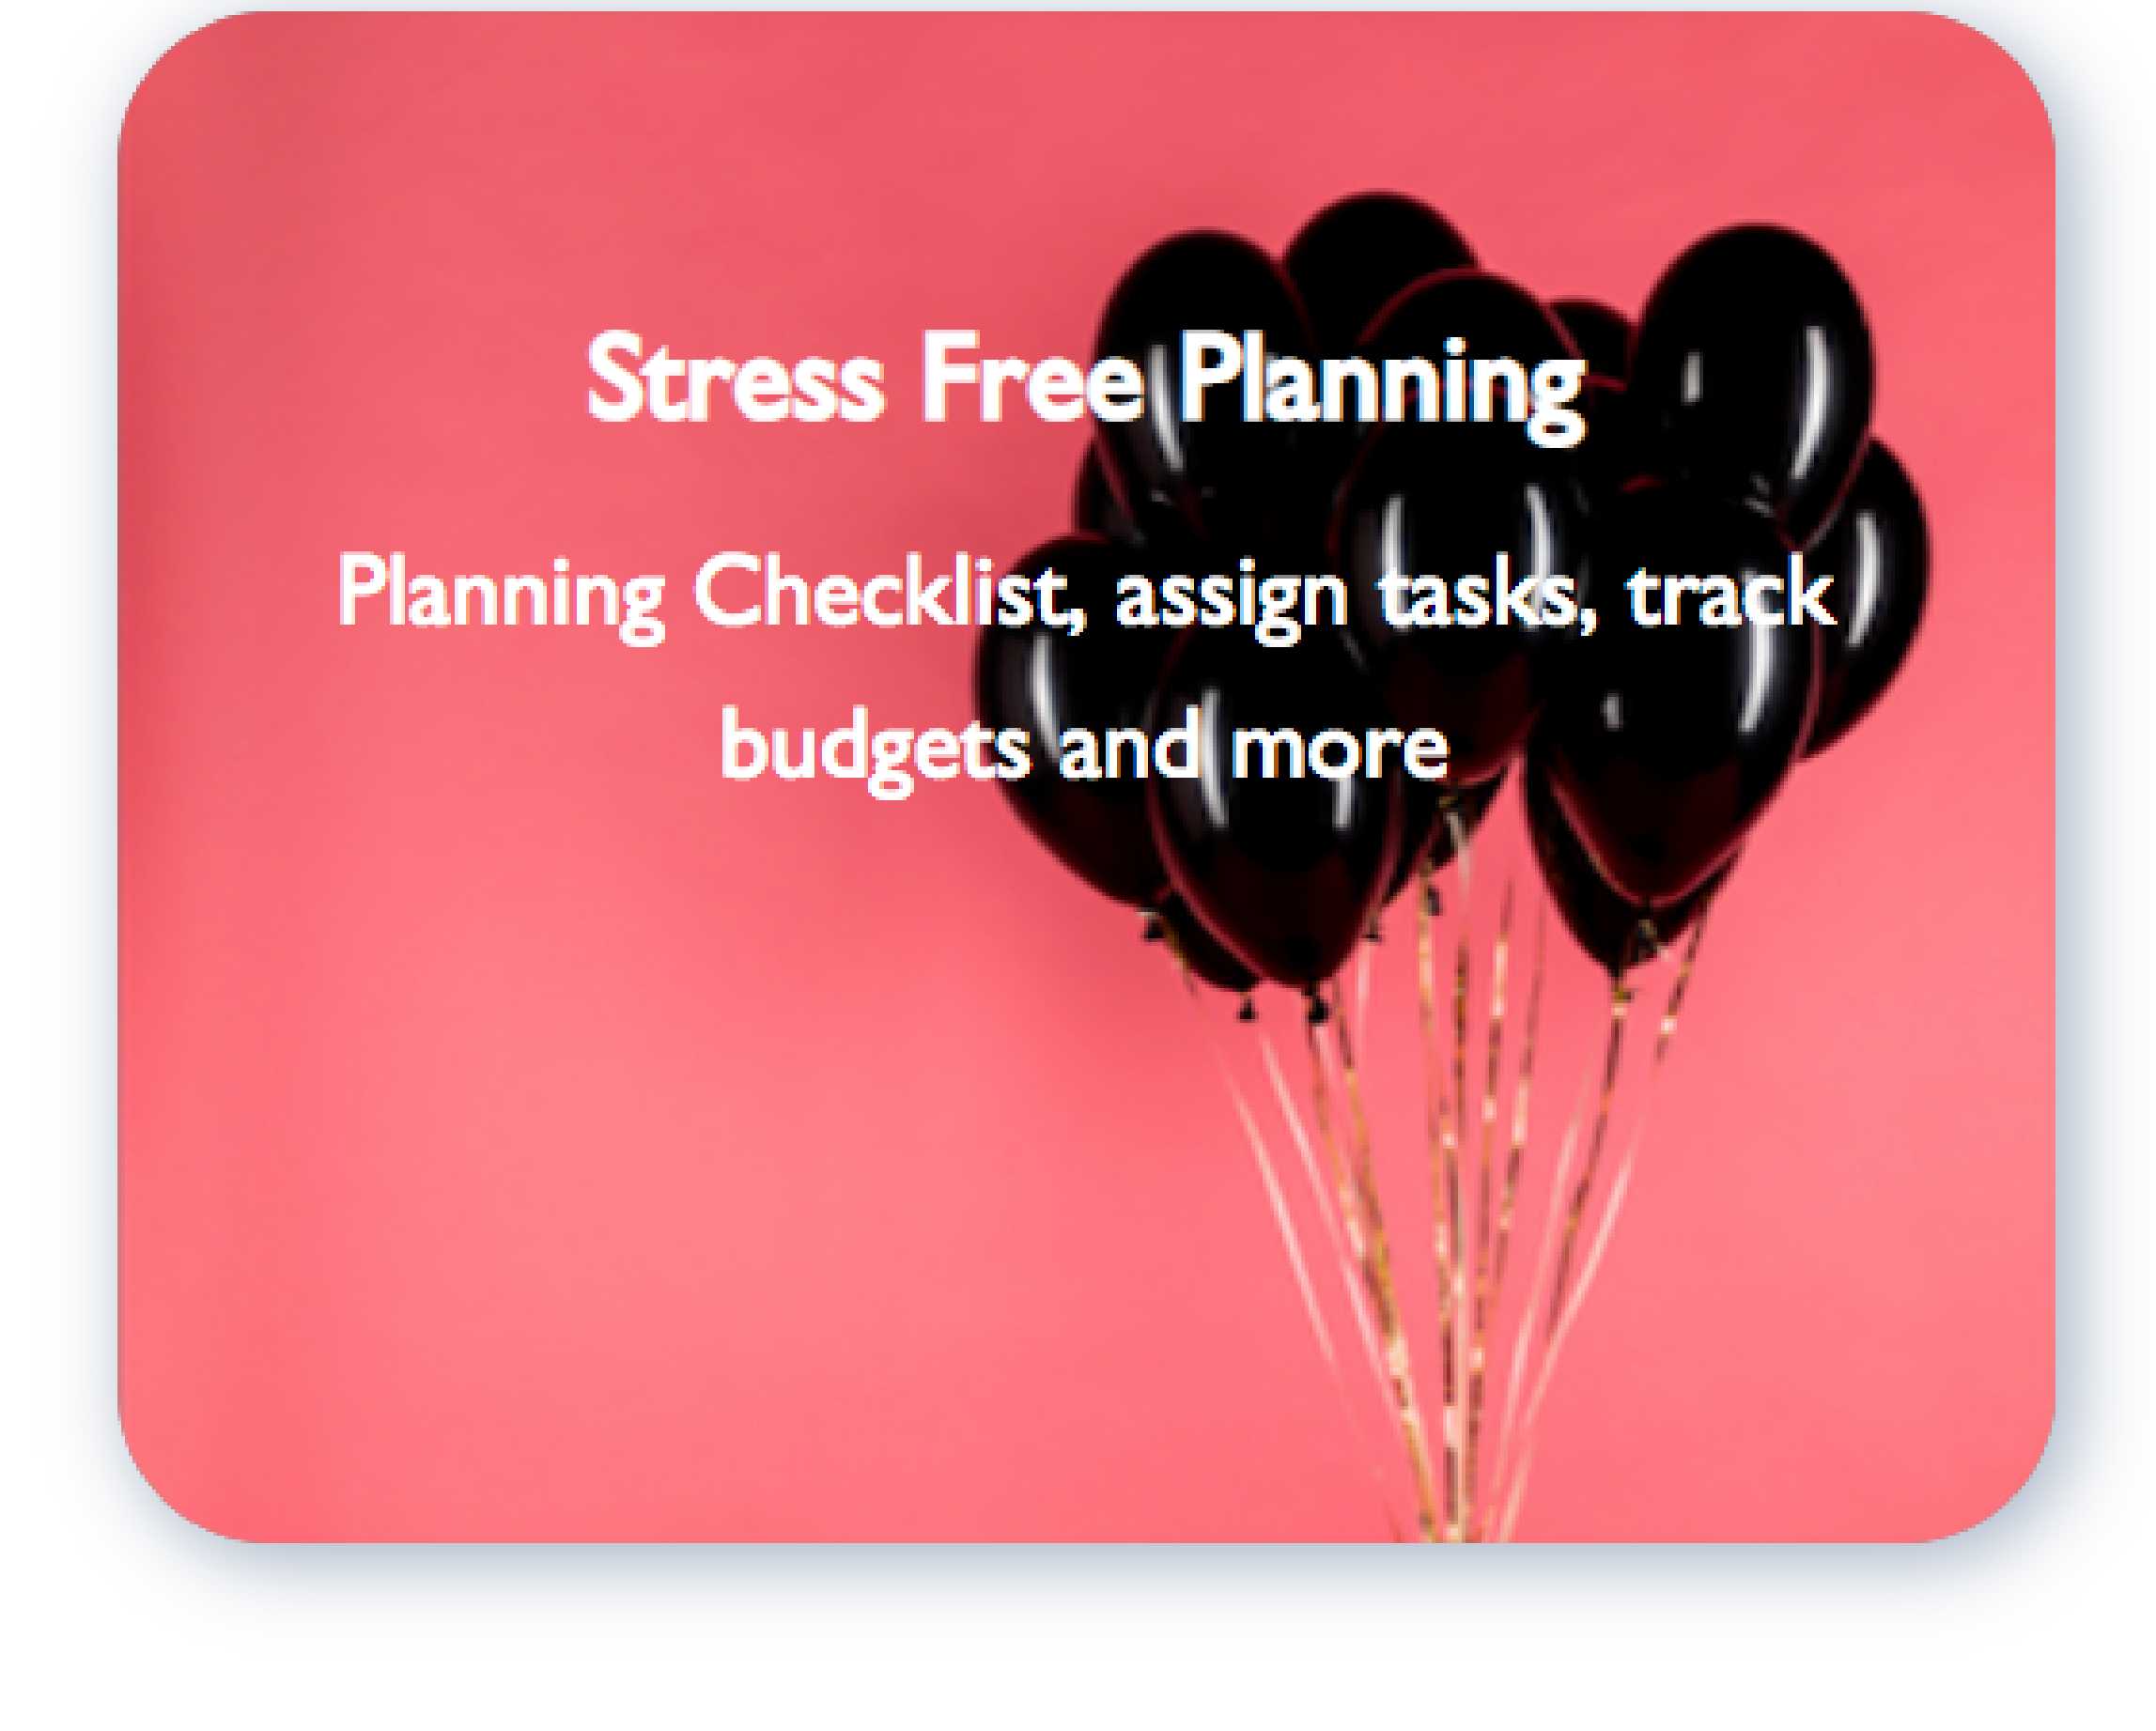 Planning & Tools
                            Easy planning checklist, assign to Co-Hosts, add due date and budgets
                            